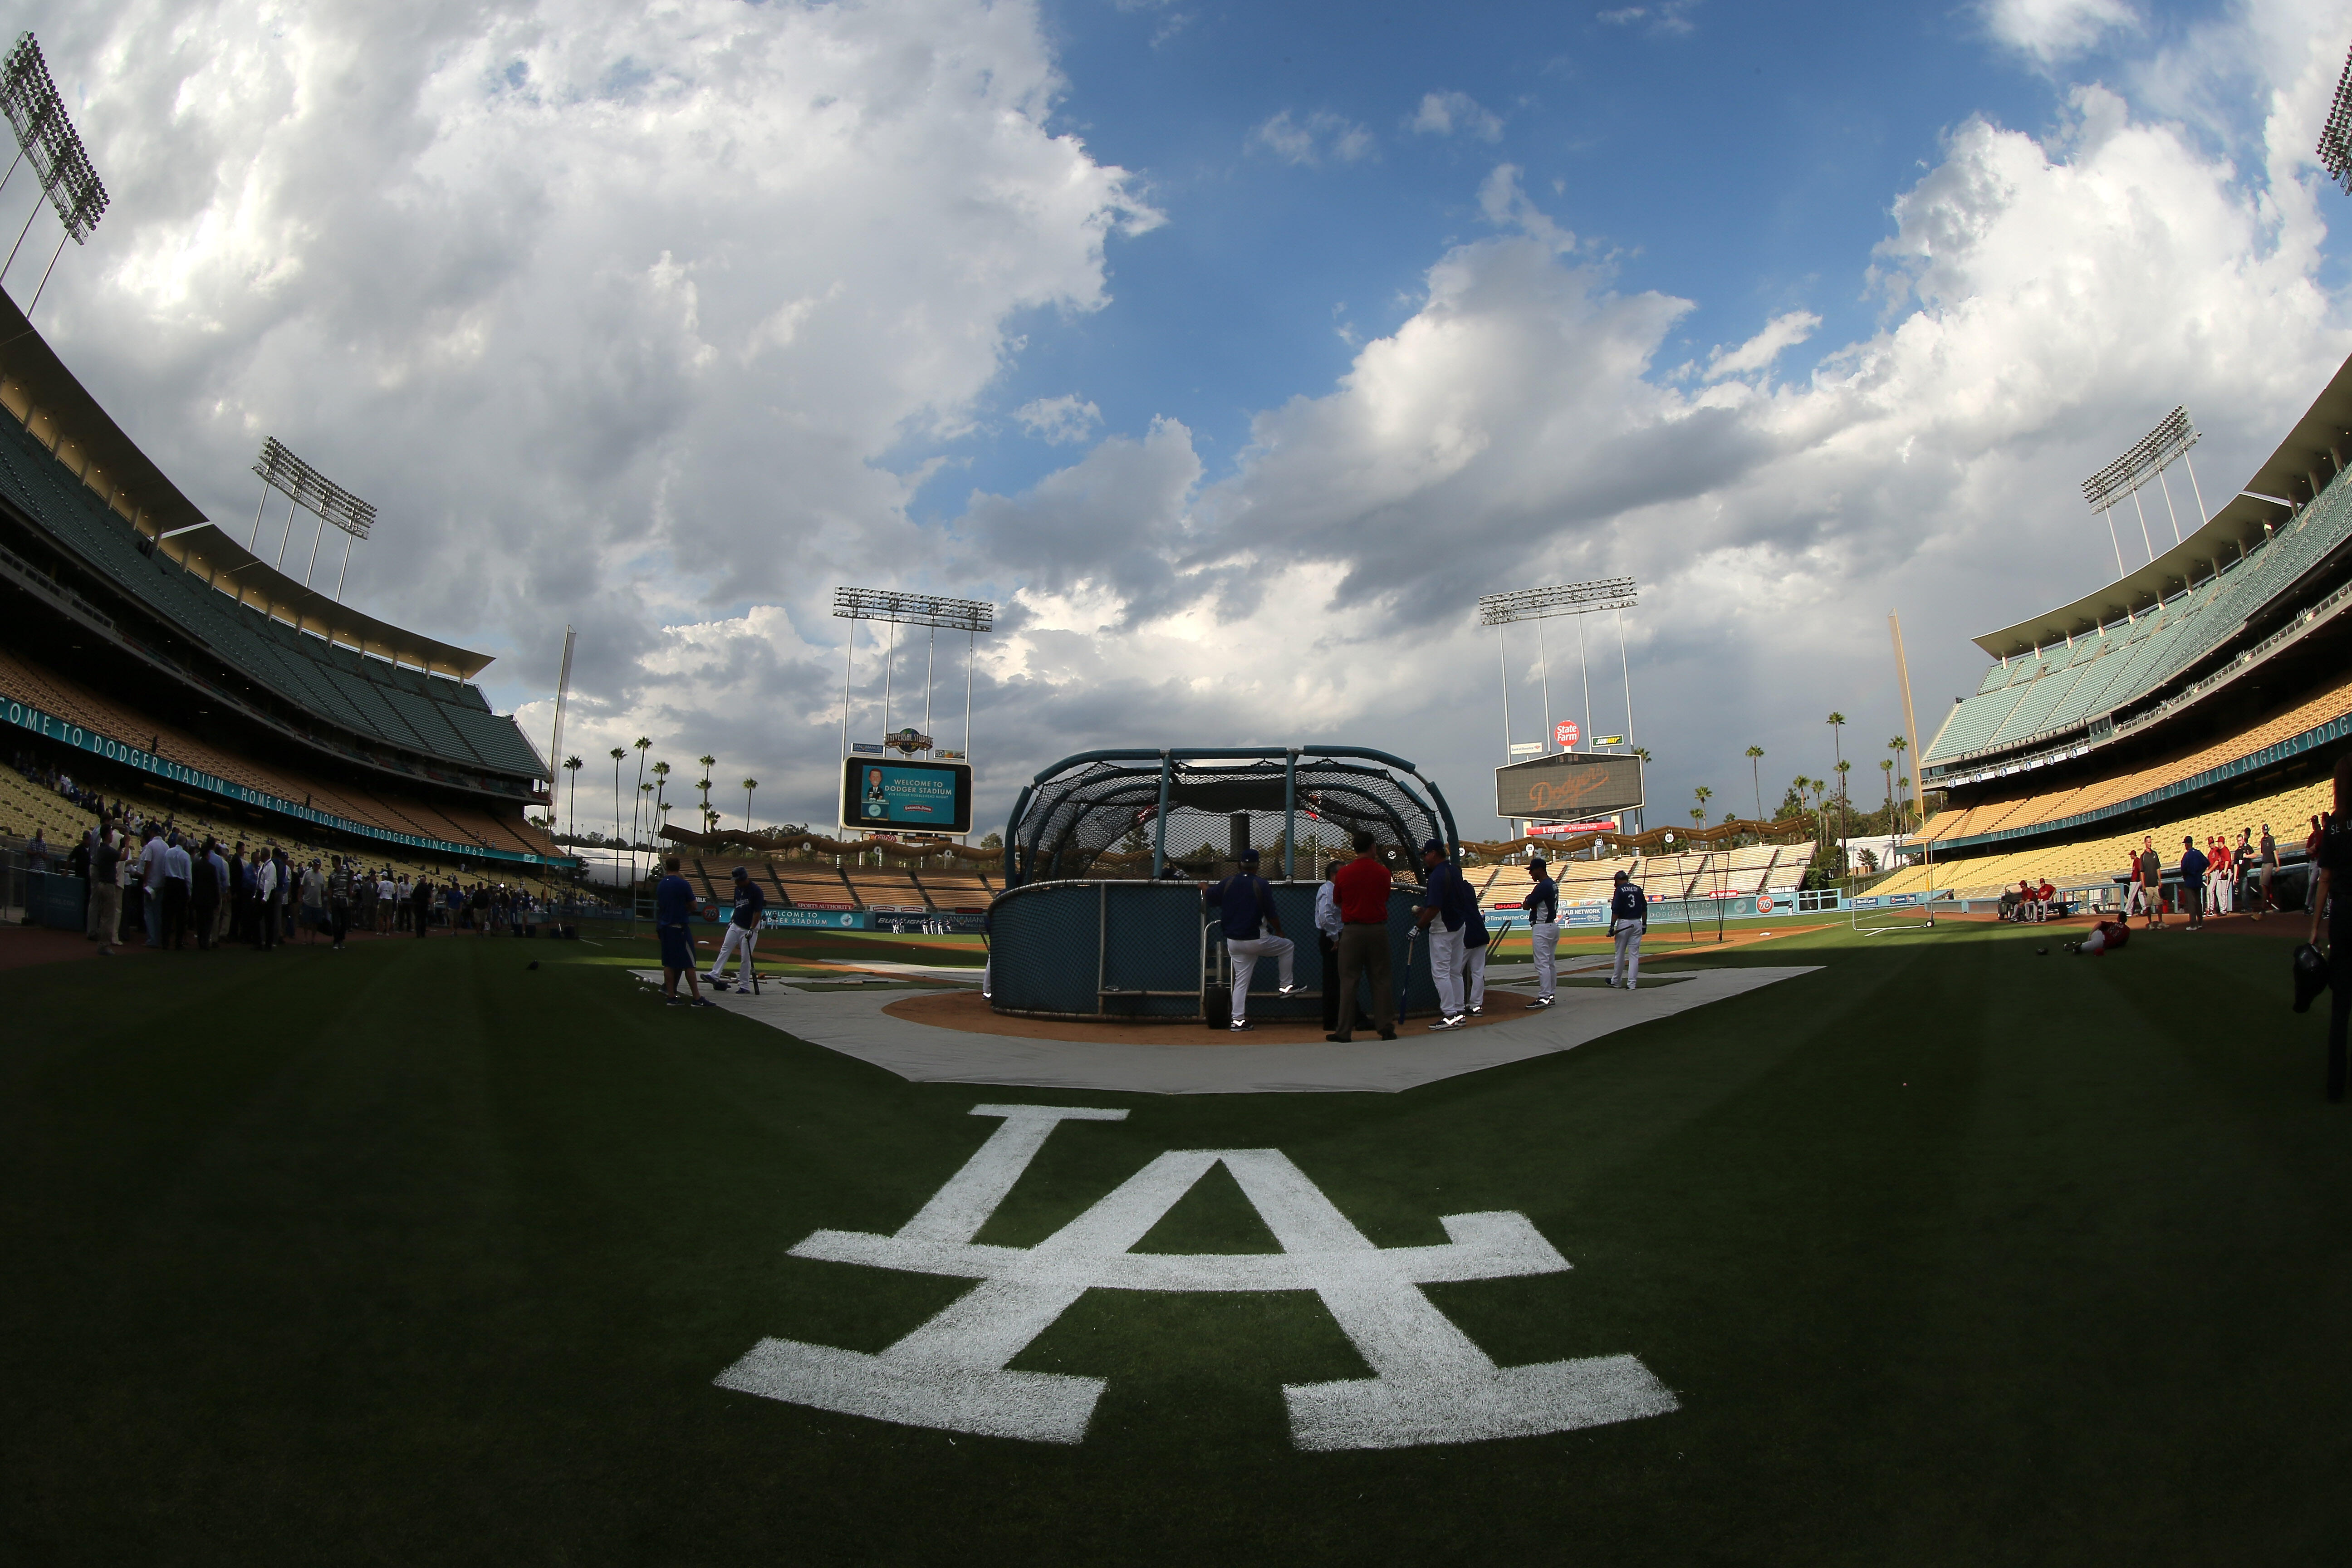 LOS ANGELES, CA - AUGUST 30:  A general view of batting practice before the game between the Arizona Diamondbacks  and the Los Angeles Dodgers on August 30, 2012 at Dodger Stadium in Los Angeles, California.  (Photo by Stephen Dunn/Getty Images)